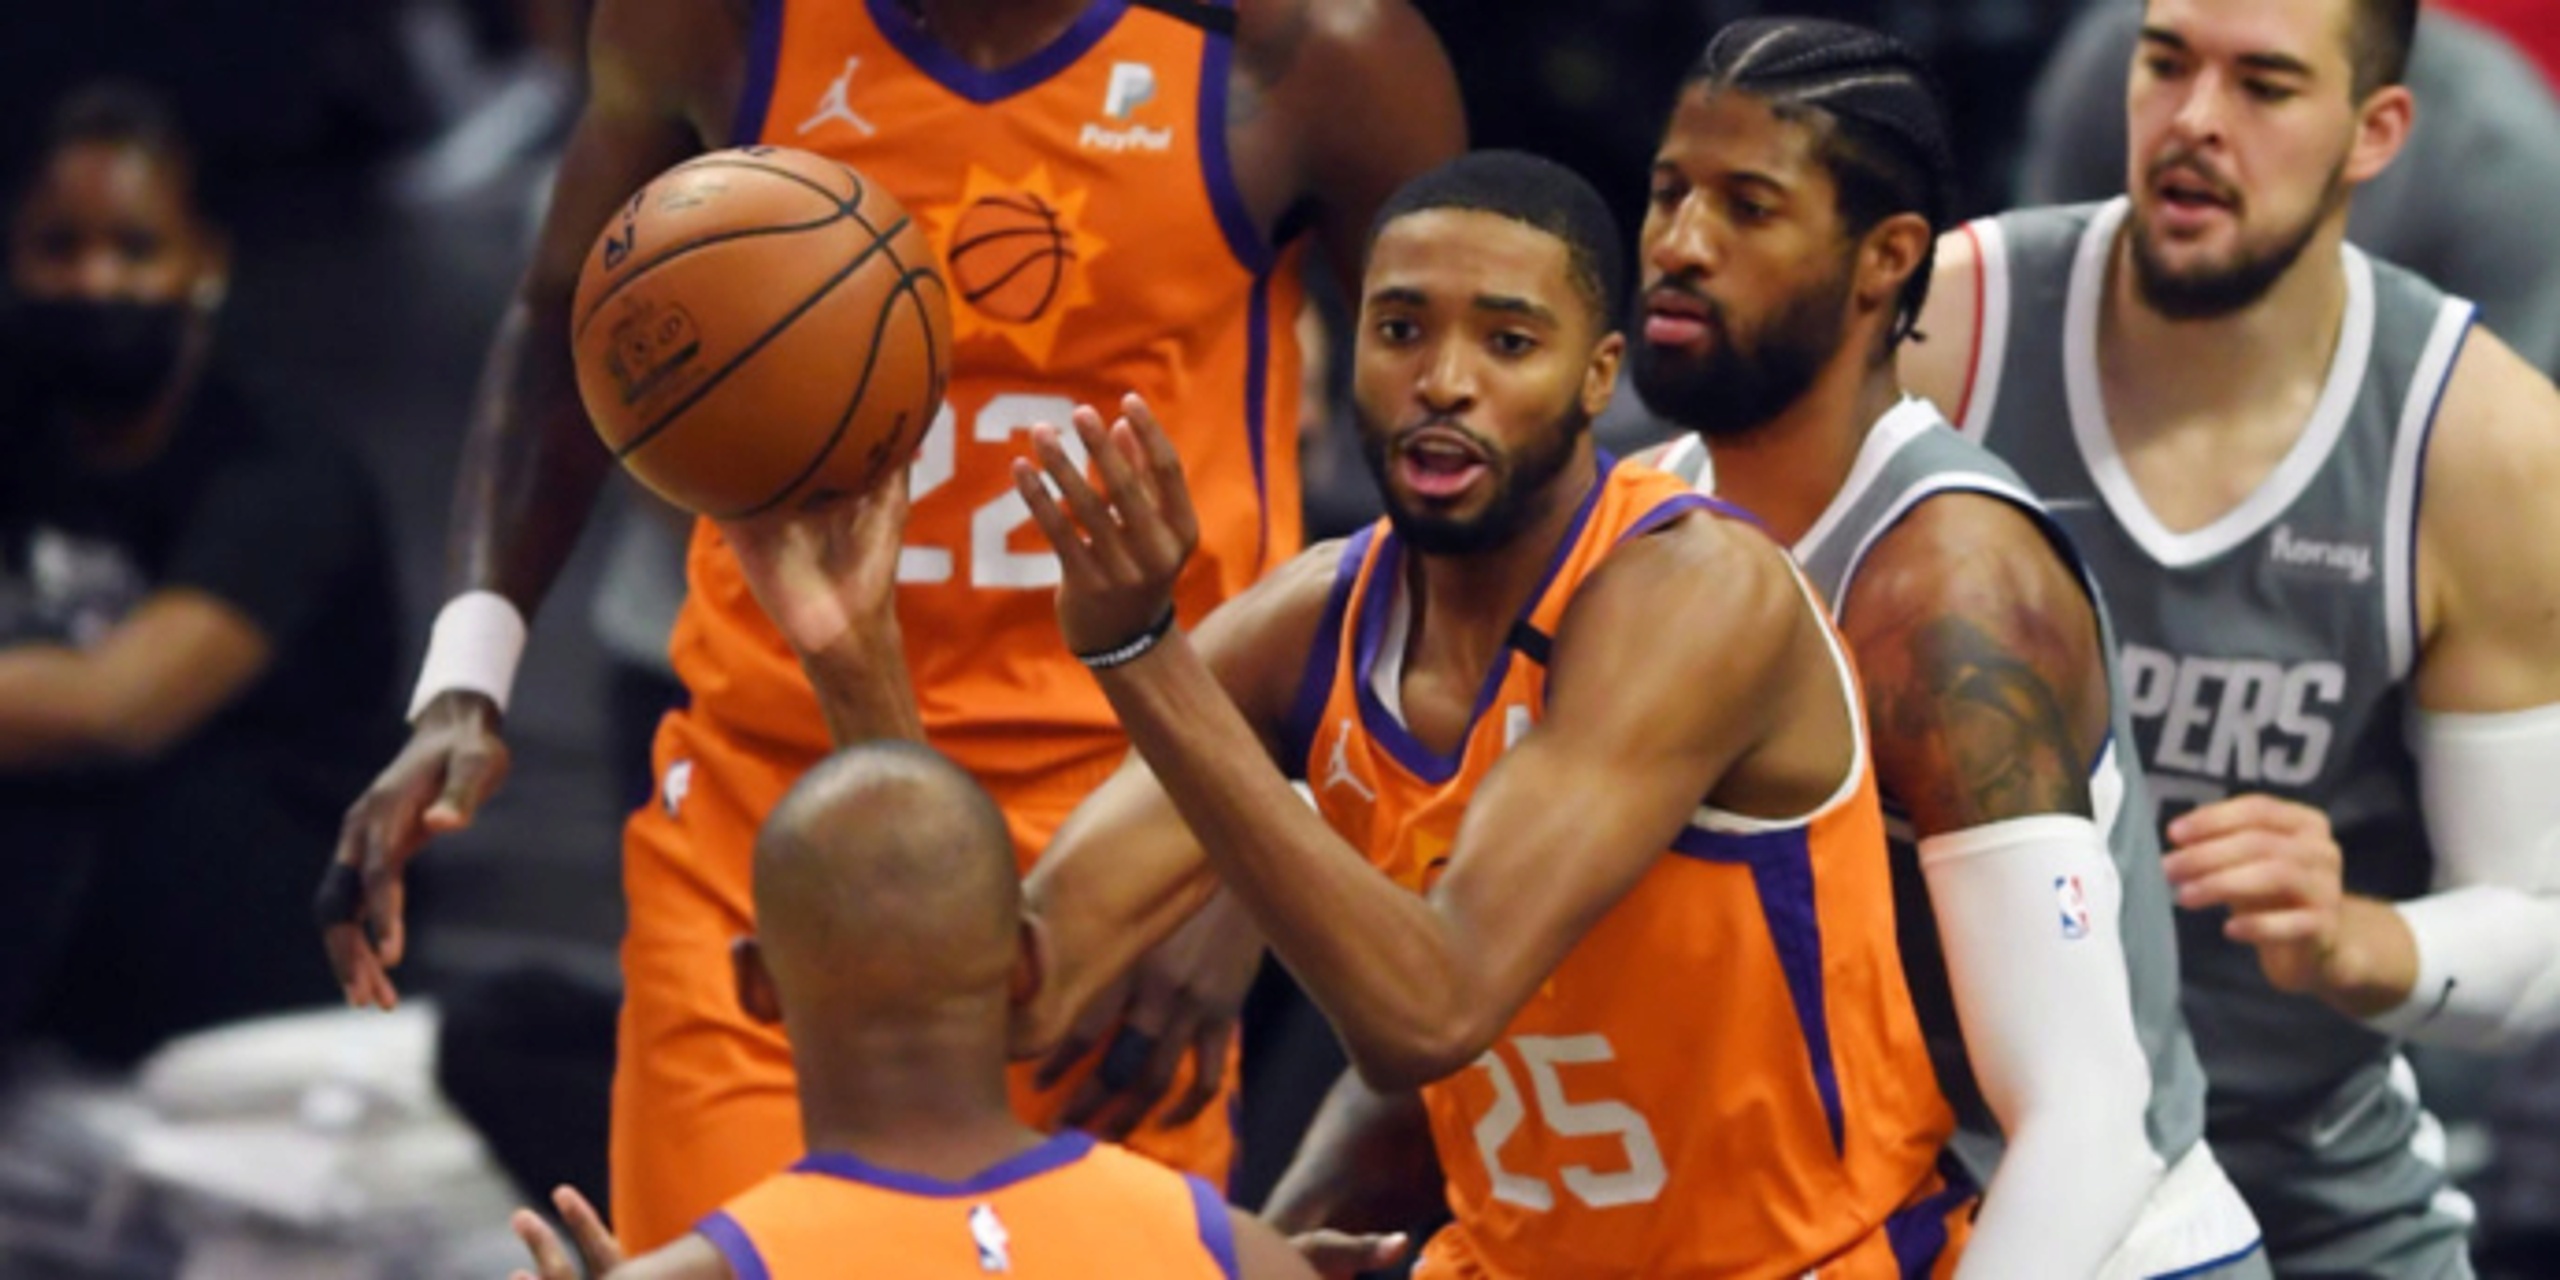 Suns outlast Clippers 84-80, take 3-1 lead in West finals